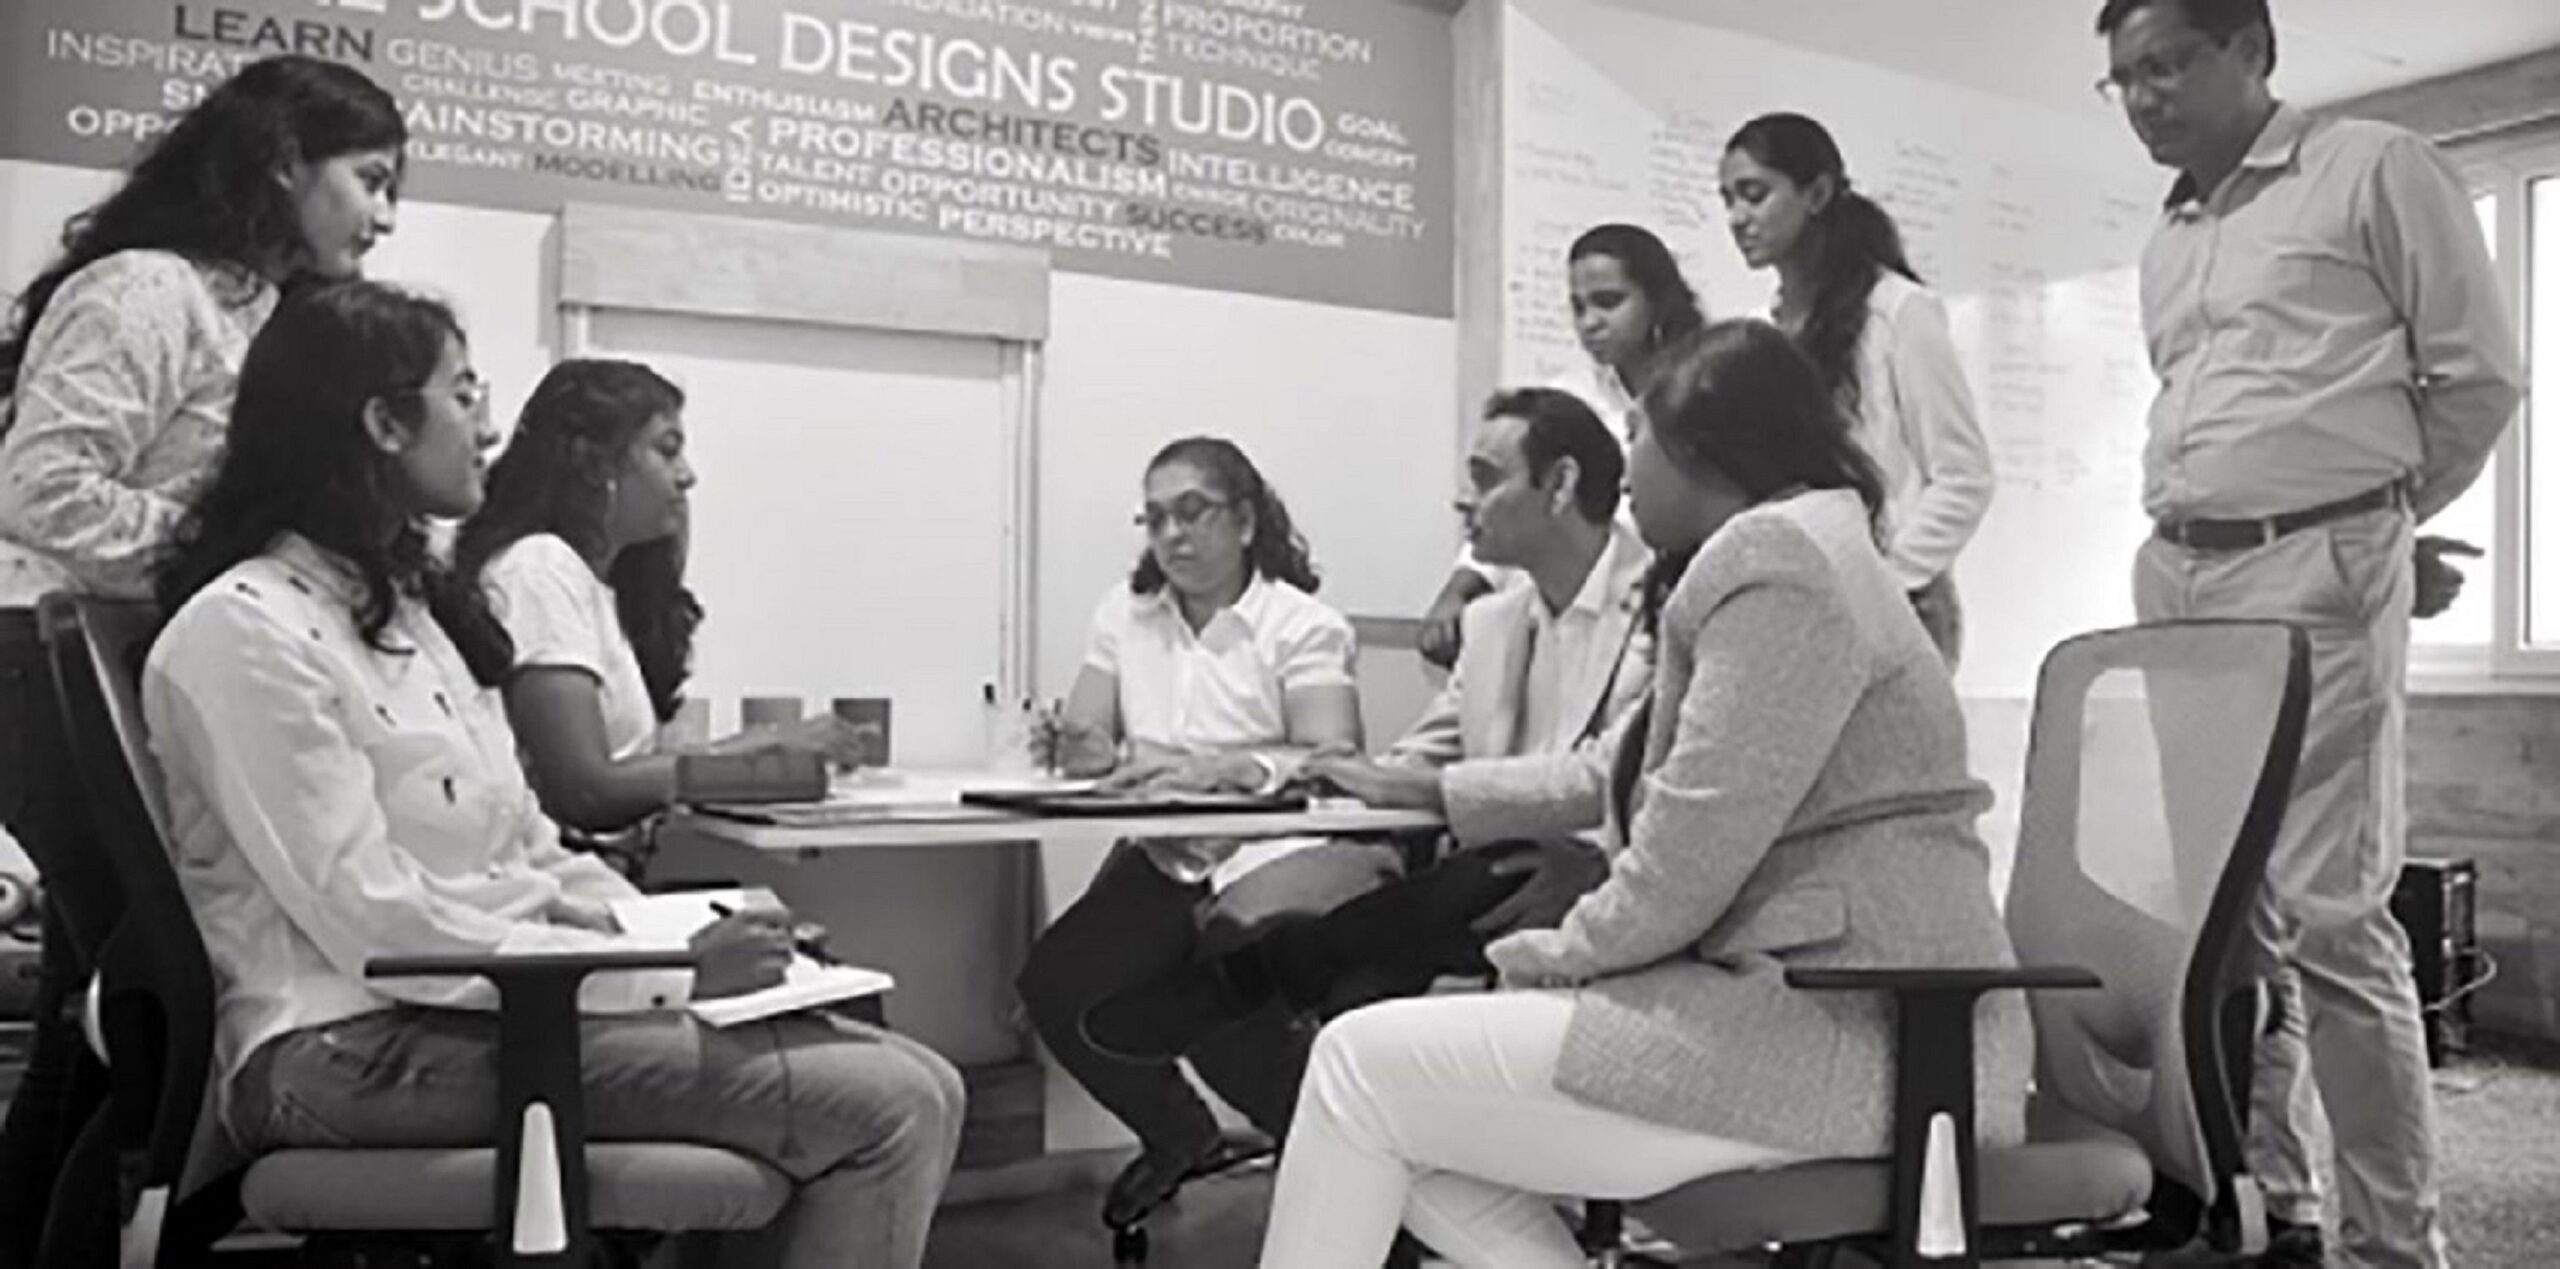 The School Designs Studio's Team. A team of Top School Architects in India.